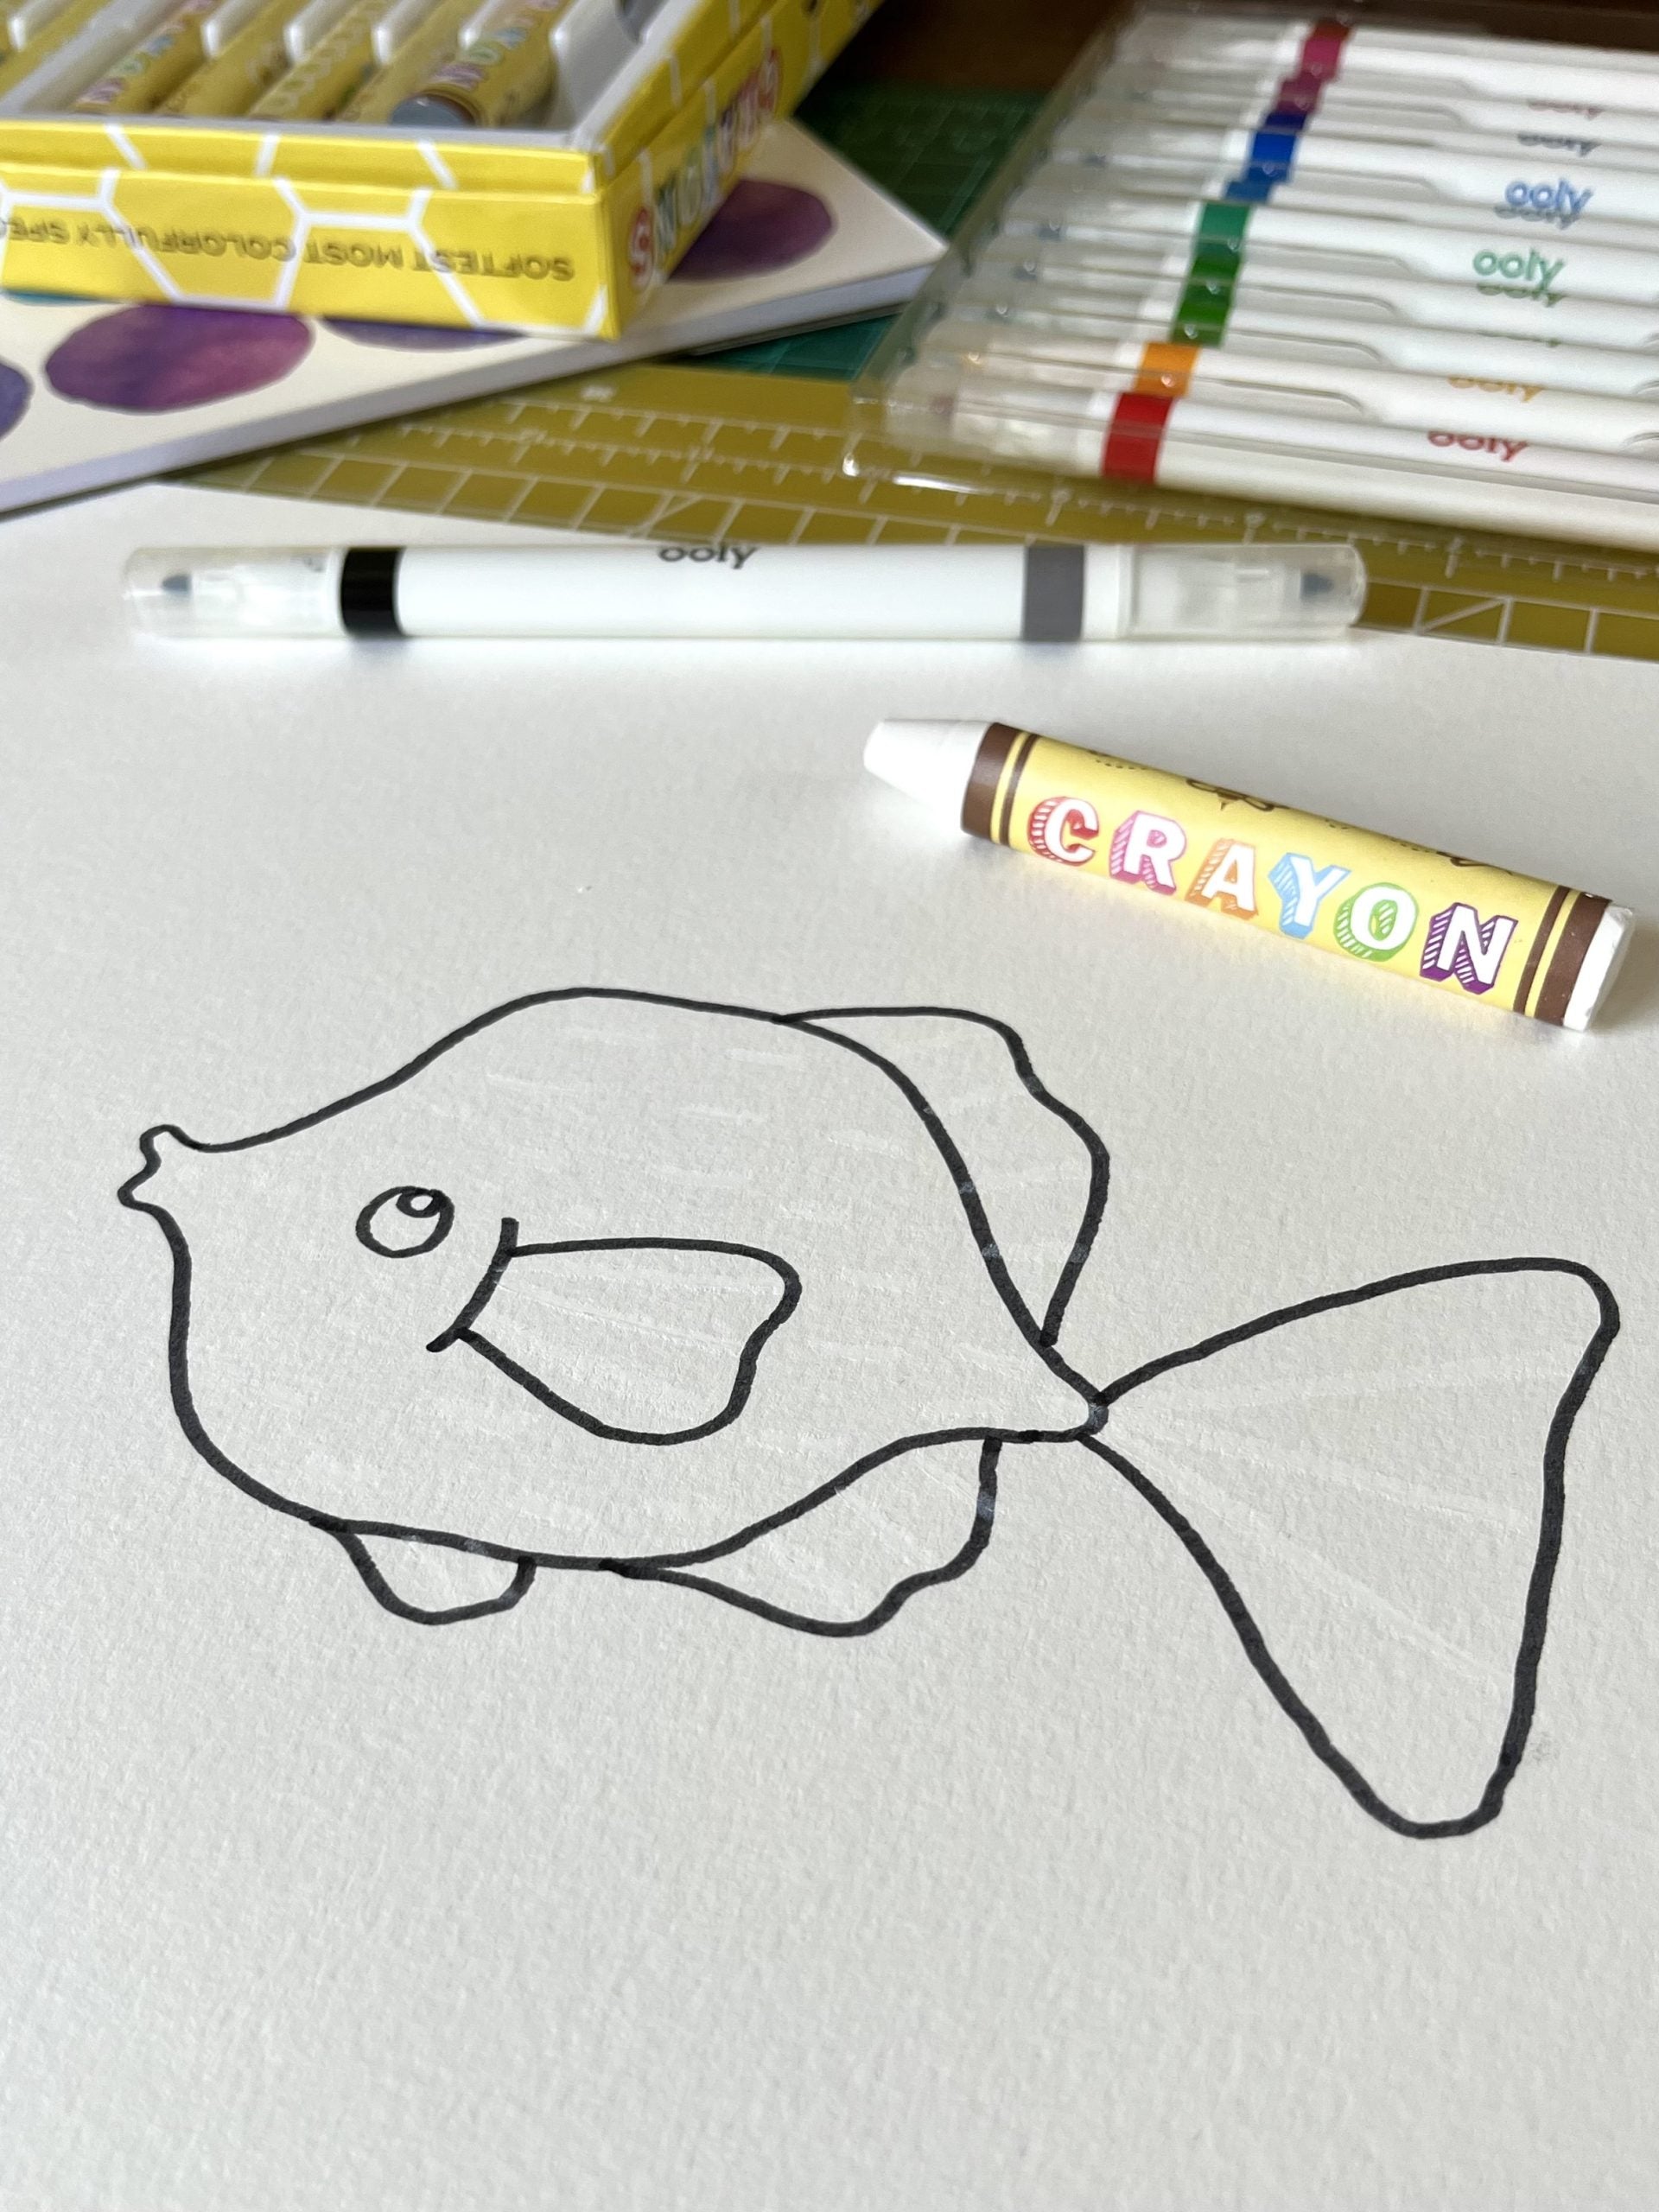 Outline of fish with crayons, markers, and paints